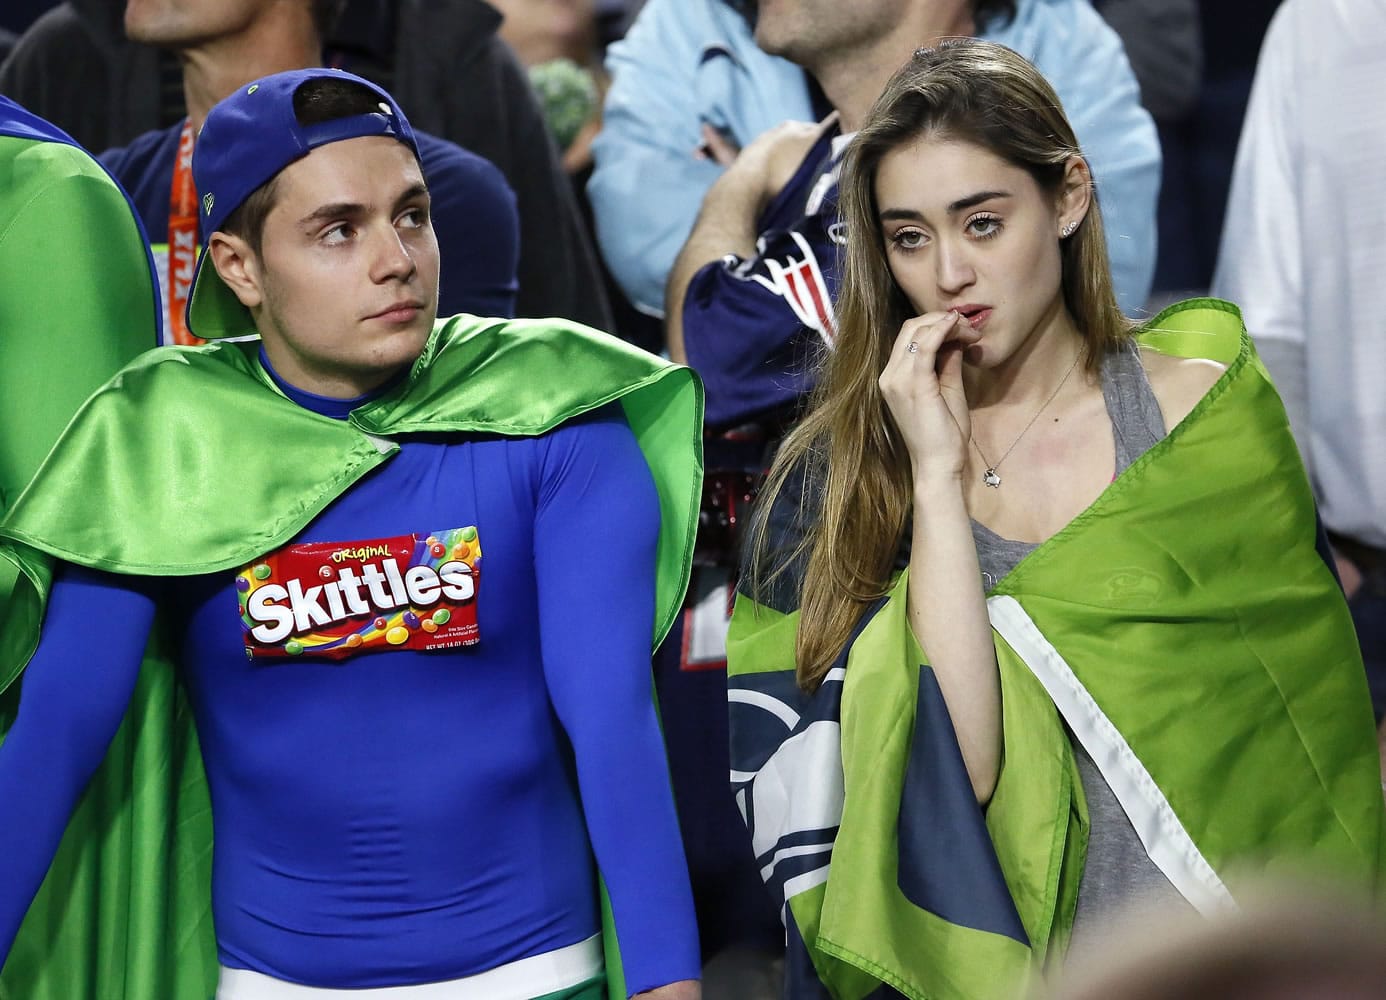 Seattle Seahawks fans react during the second half of the Super Bowl in Glendale, Ariz.